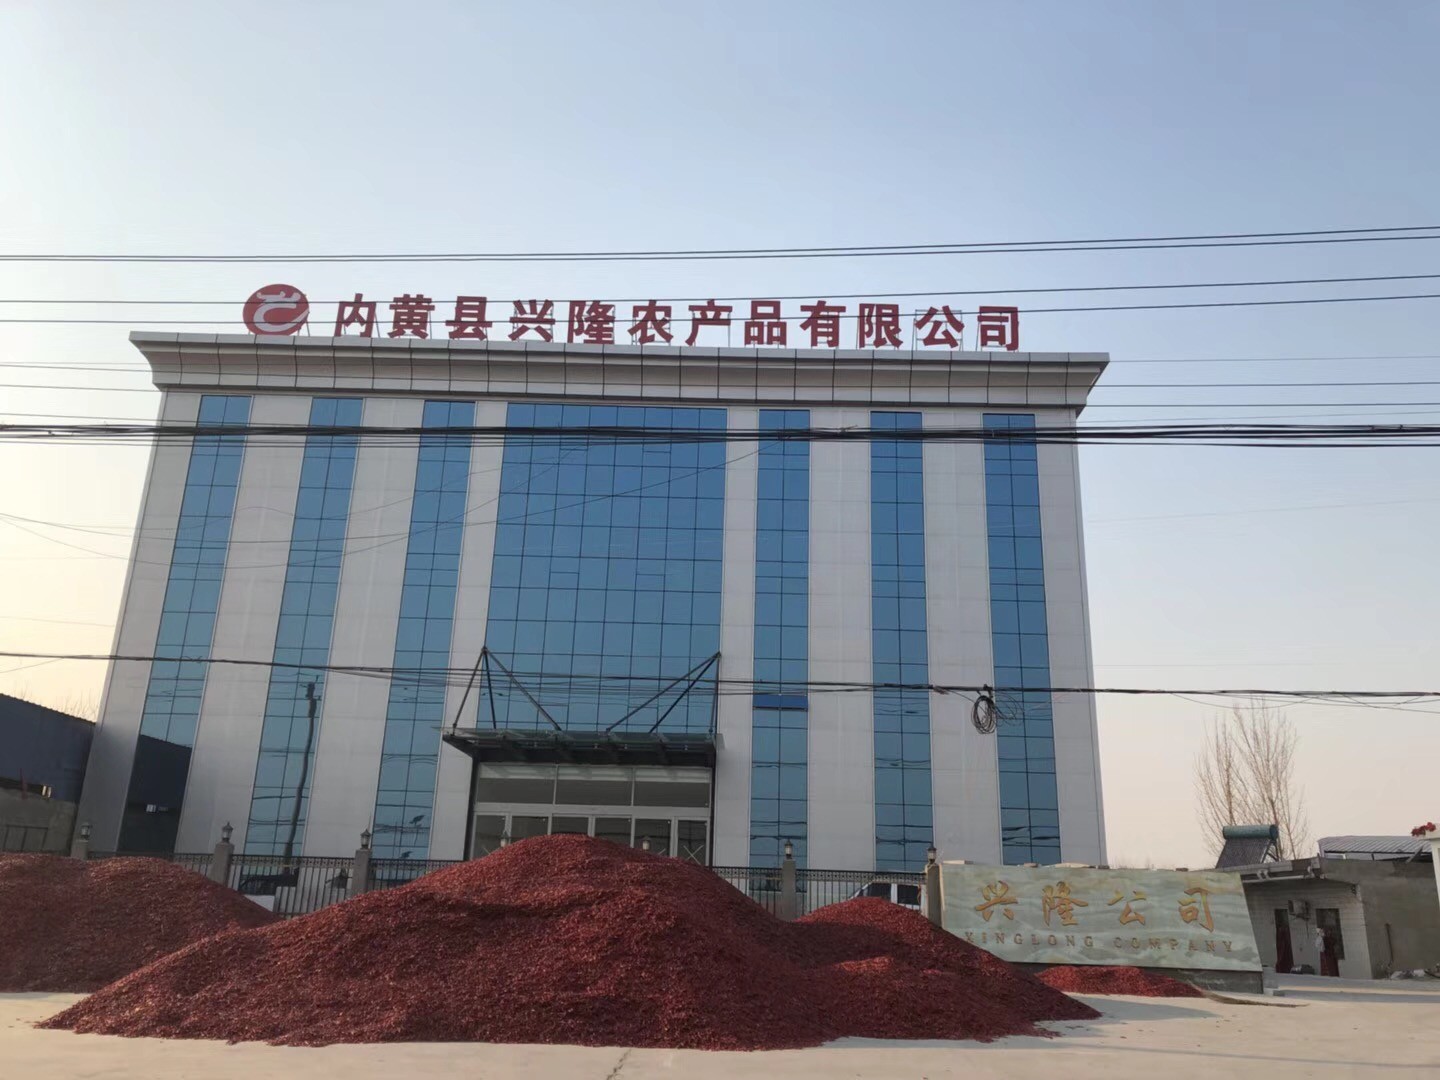 Chiny Neihuang Xinglong Agricultural Products Co. Ltd profil firmy